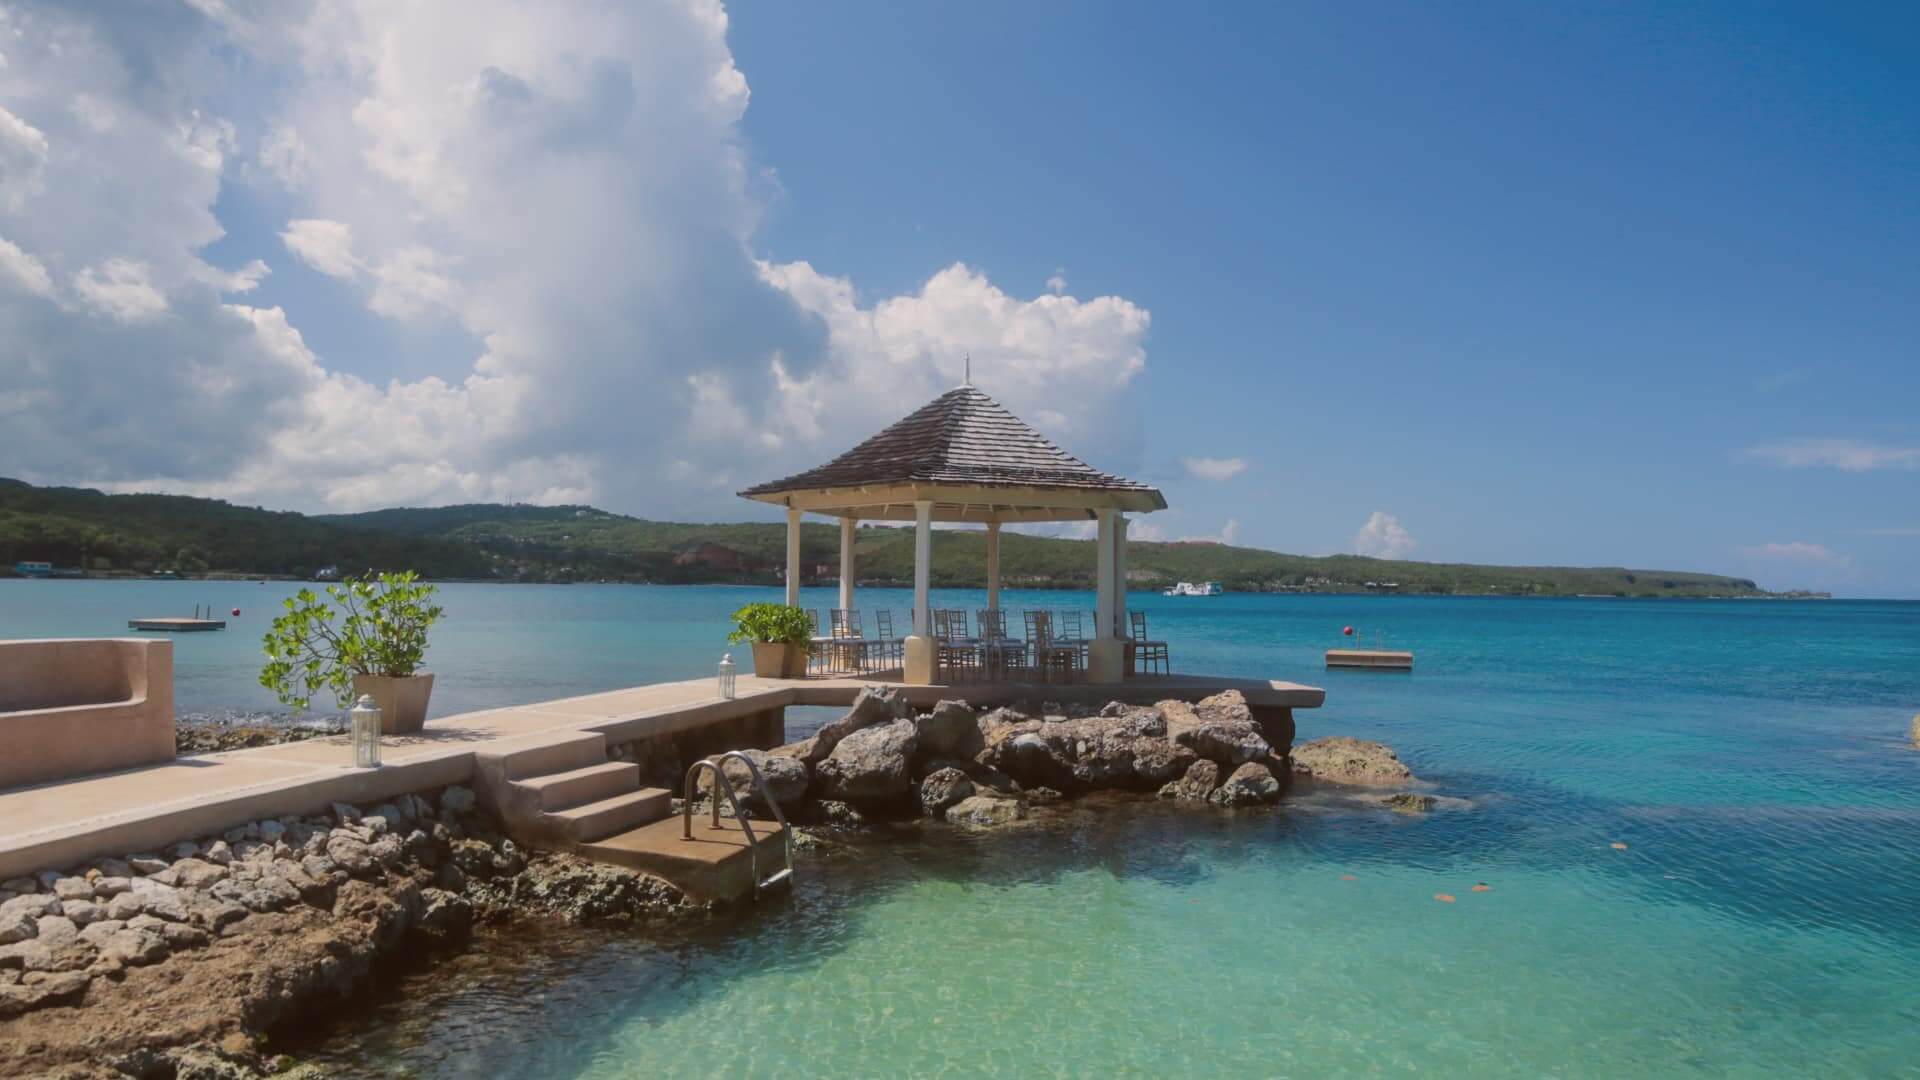 We couldn't have imagined a more beautiful location for Brandon and Ansley's destination wedding in Jamaica. (This photo is from one of the many time lapses we captured from their private villa).